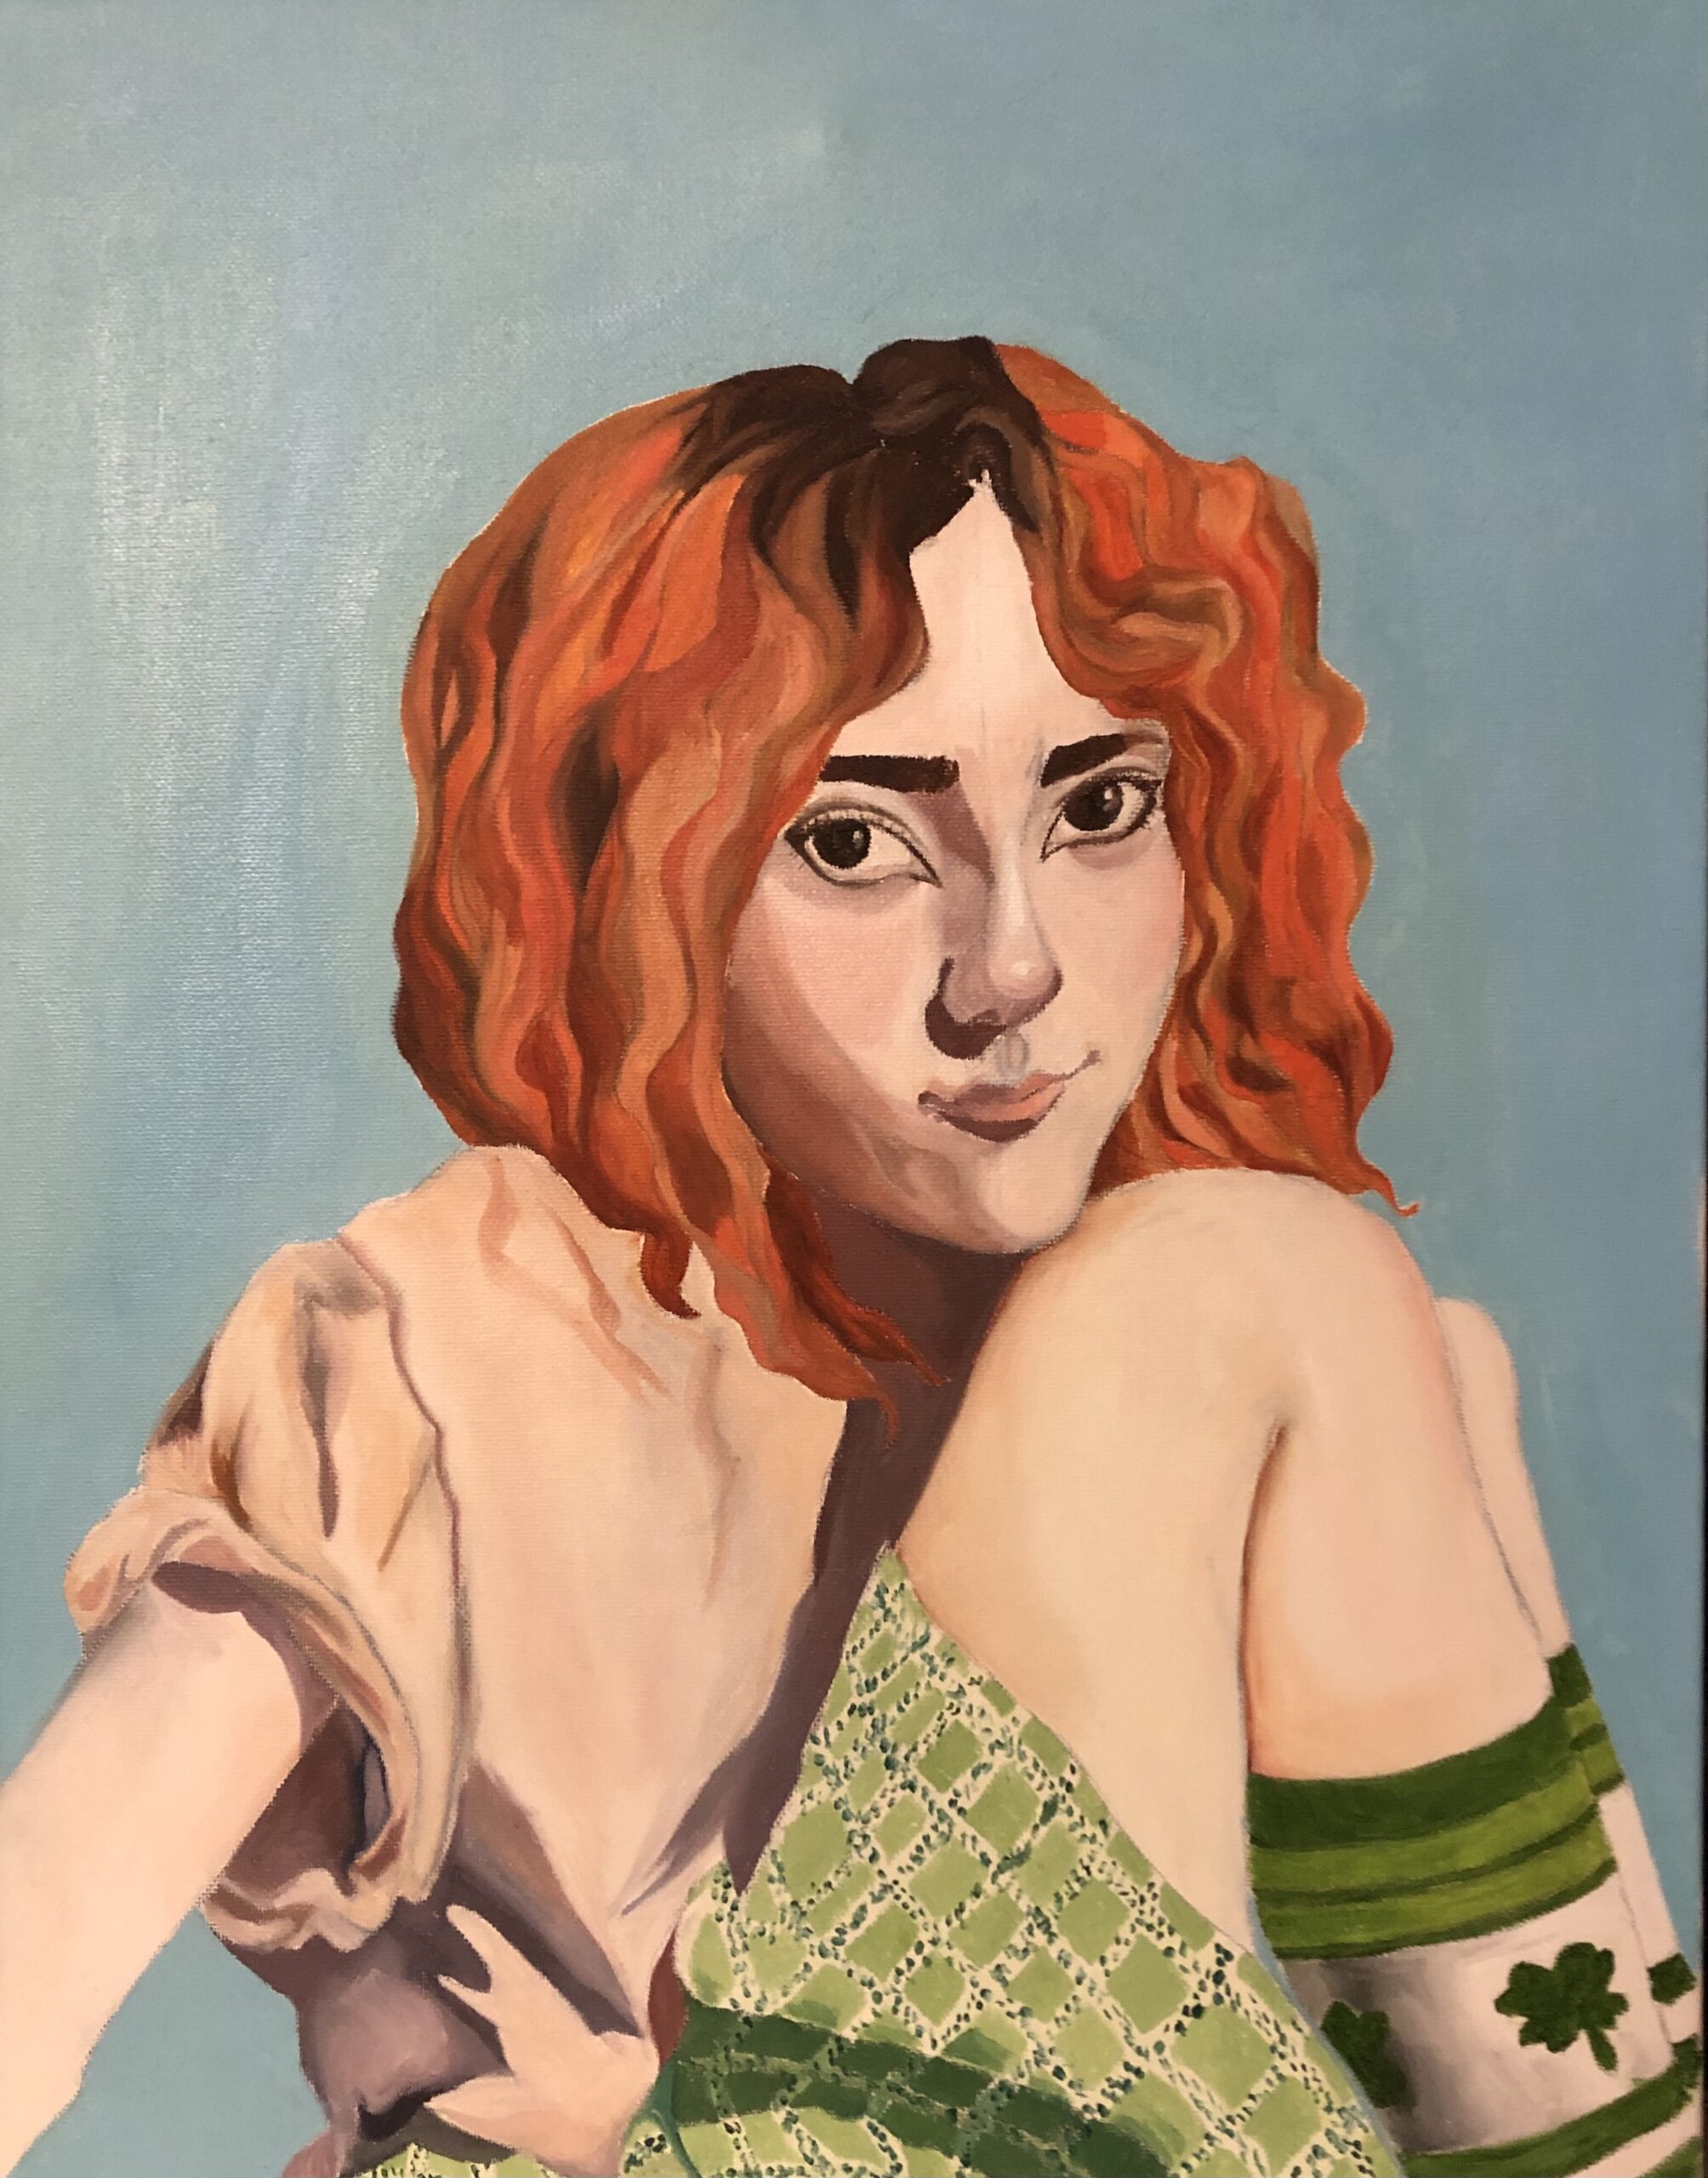 A painting of a white teenager with orange hair against a blue background